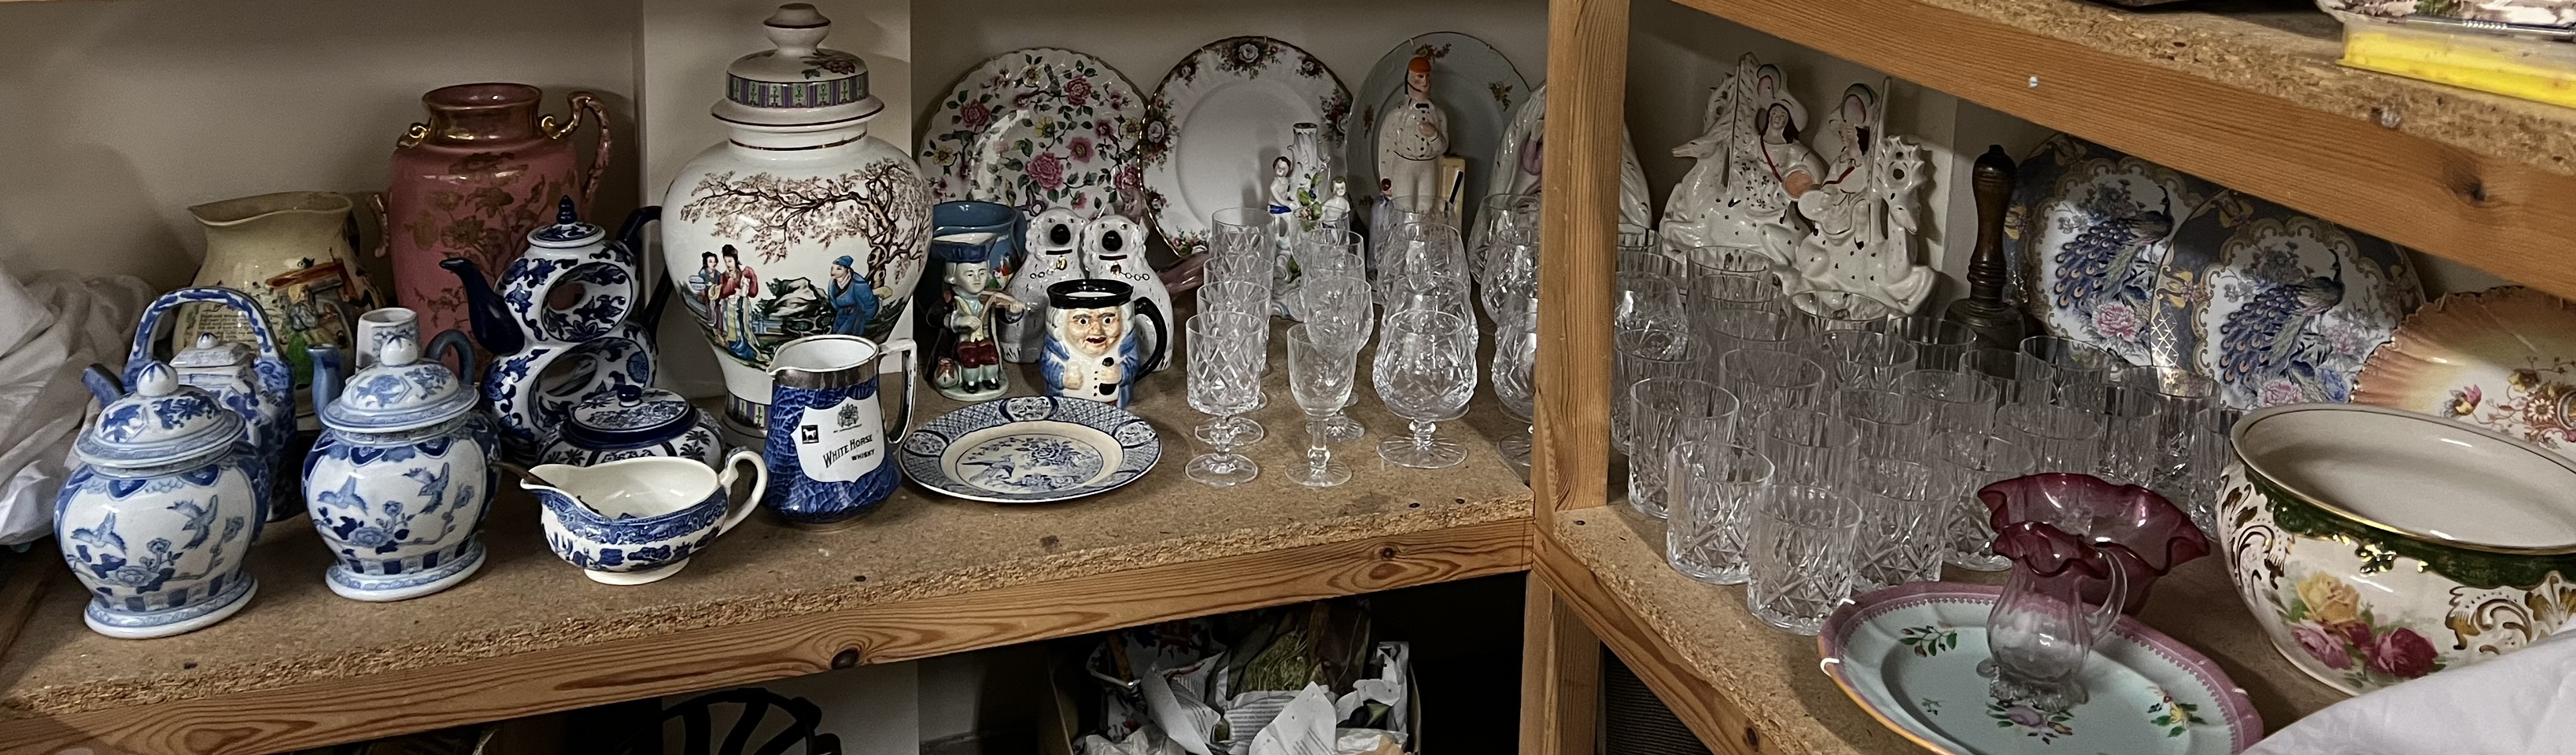 Staffordshire and Staffordshire type flat back figures together with drinking glasses, vases,